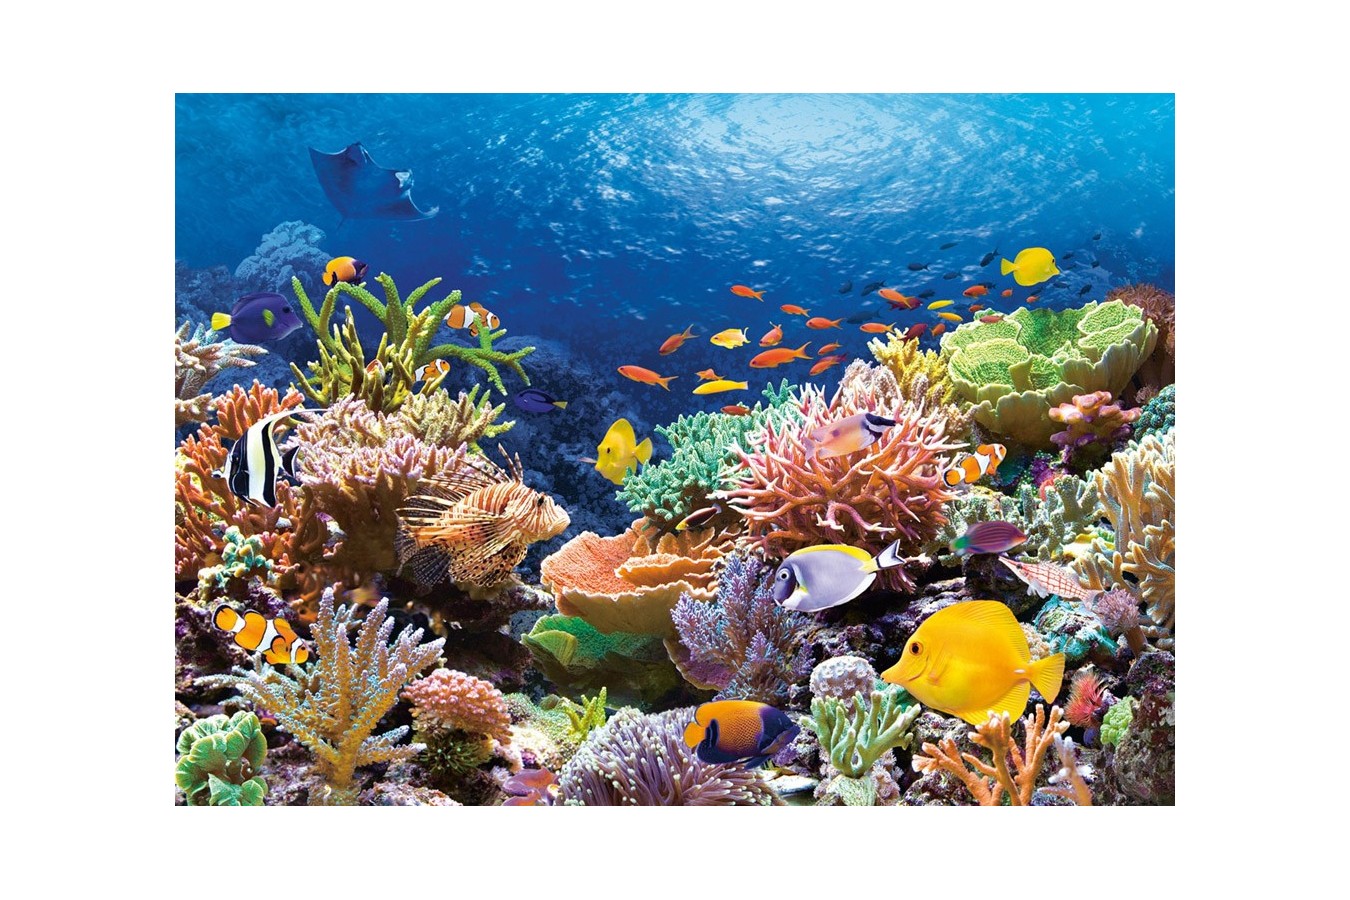 Puzzle Castorland - Coral Reef Fishes, 1000 piese